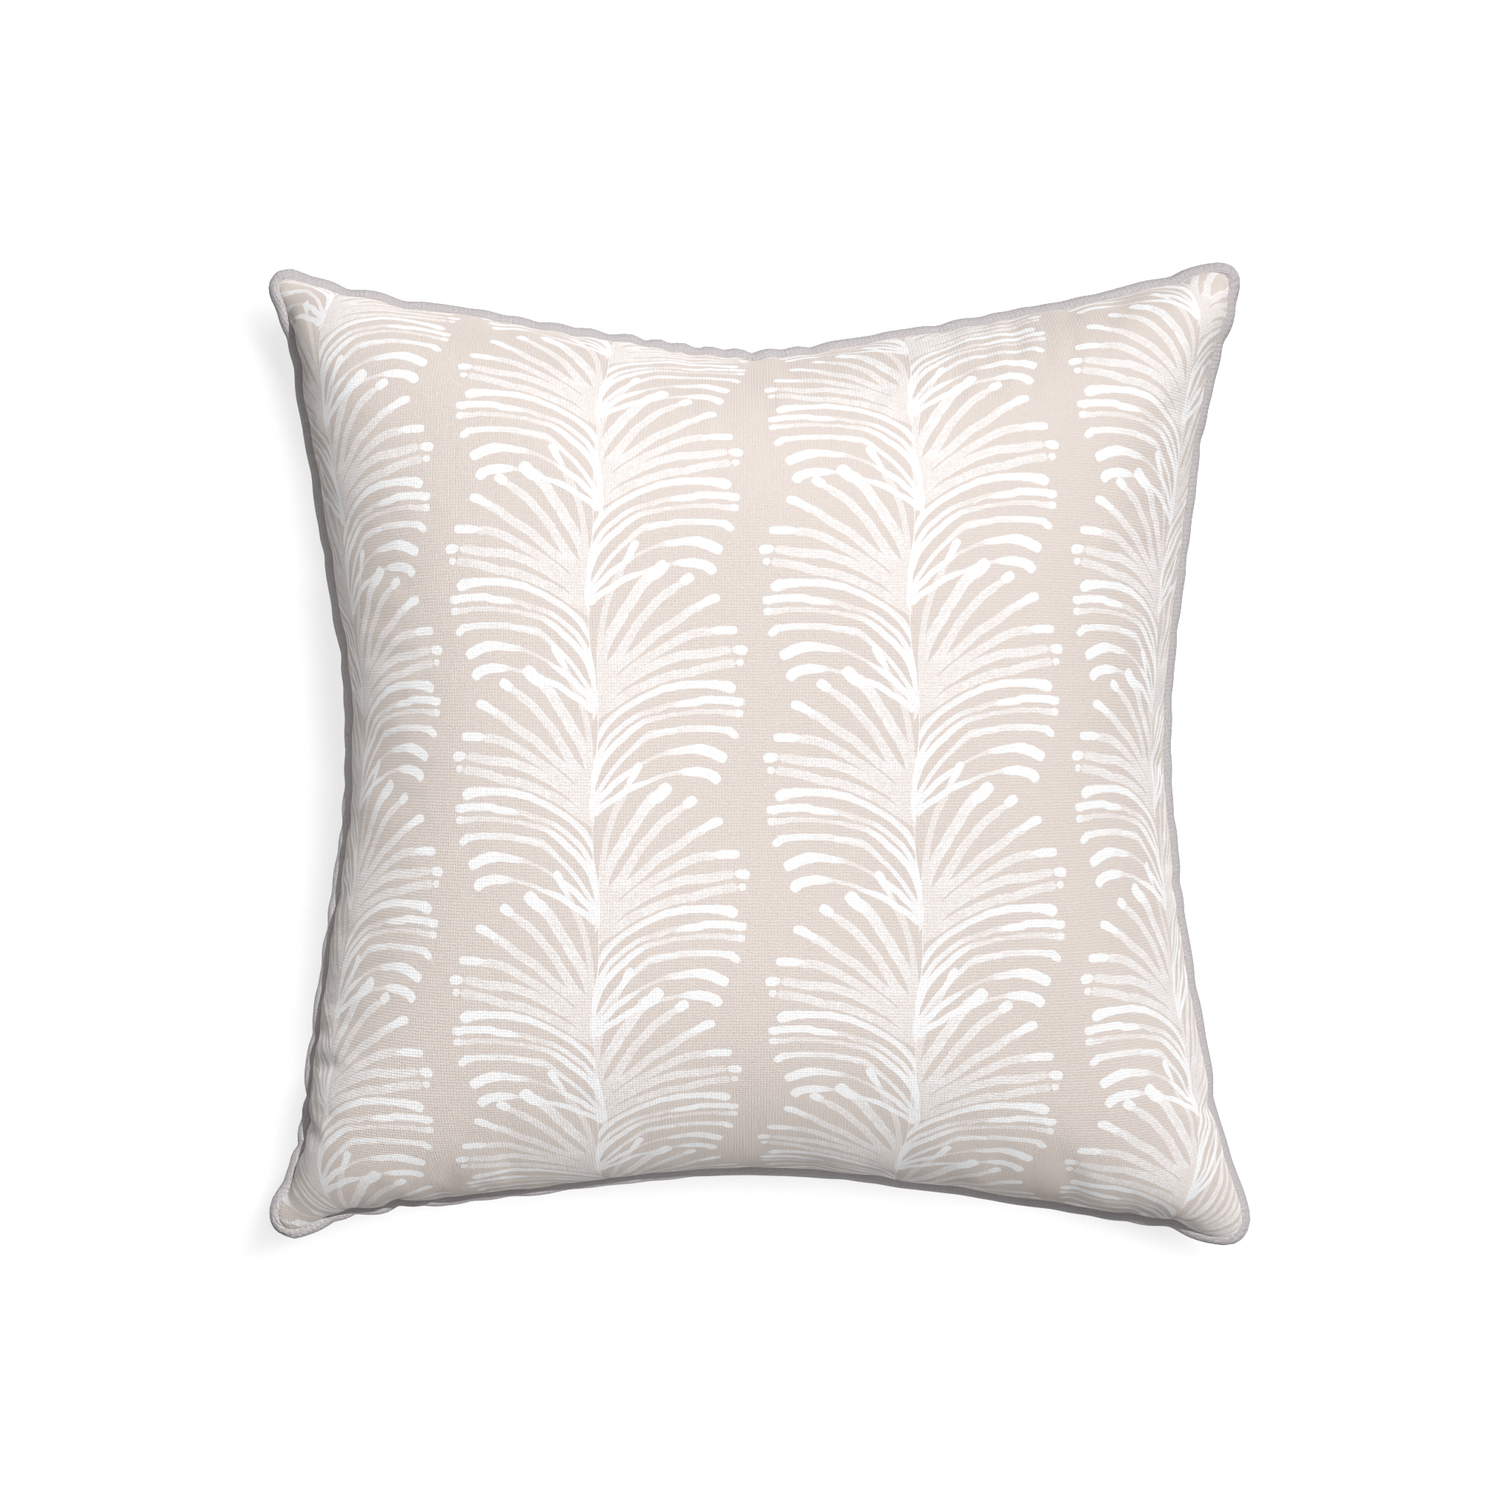 22-square emma sand custom pillow with pebble piping on white background